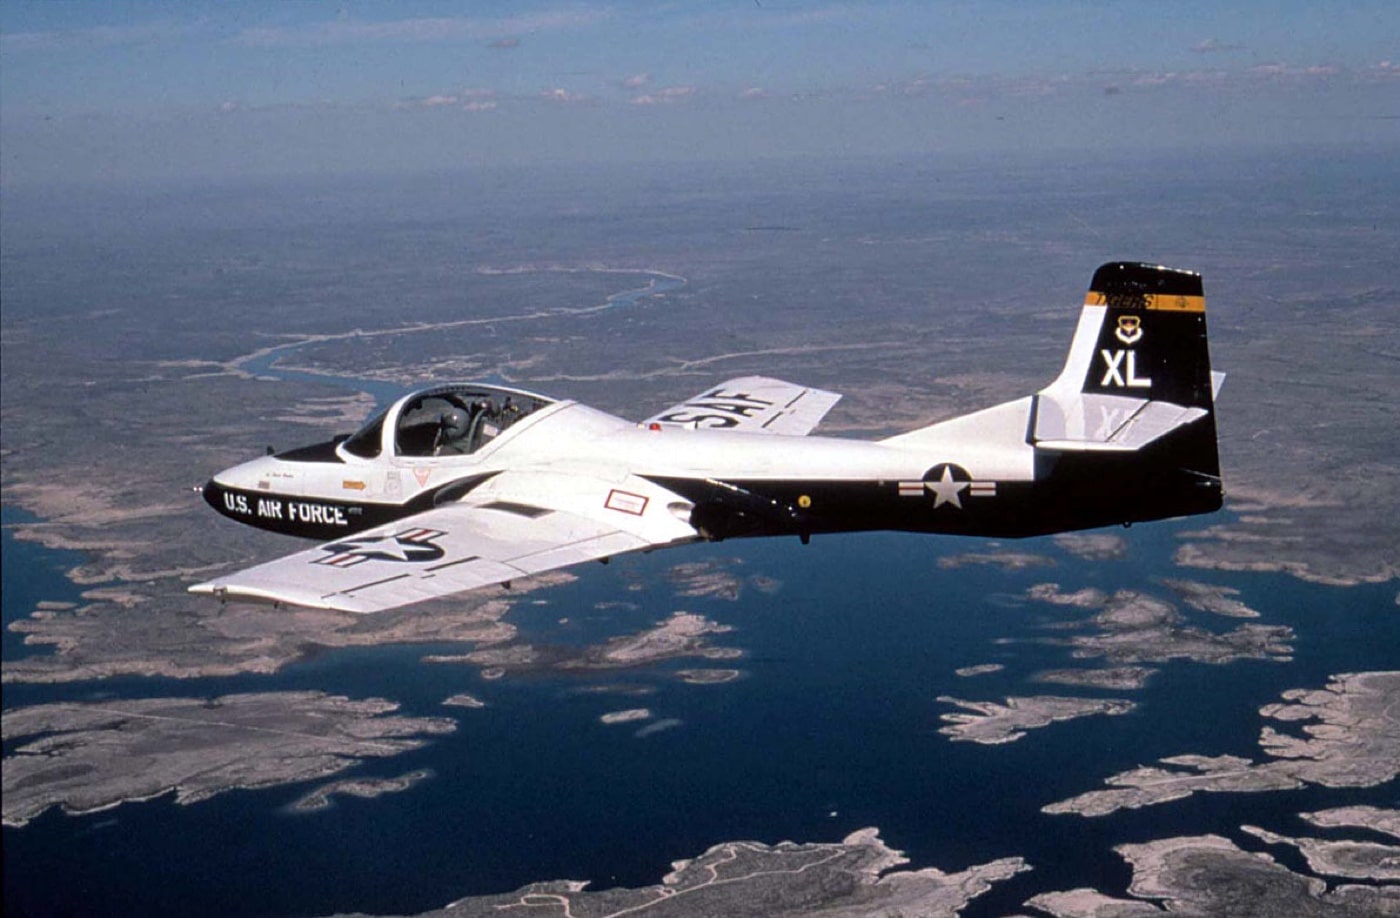 In this digital image, we see a T-37 trainer aircraft in flight over Texas. The Cessna T-37 Tweet is a small, economical twin-engined jet trainer aircraft. It was flown for decades as a primary trainer of the United States Air Force as well as in the air forces of several other nations.